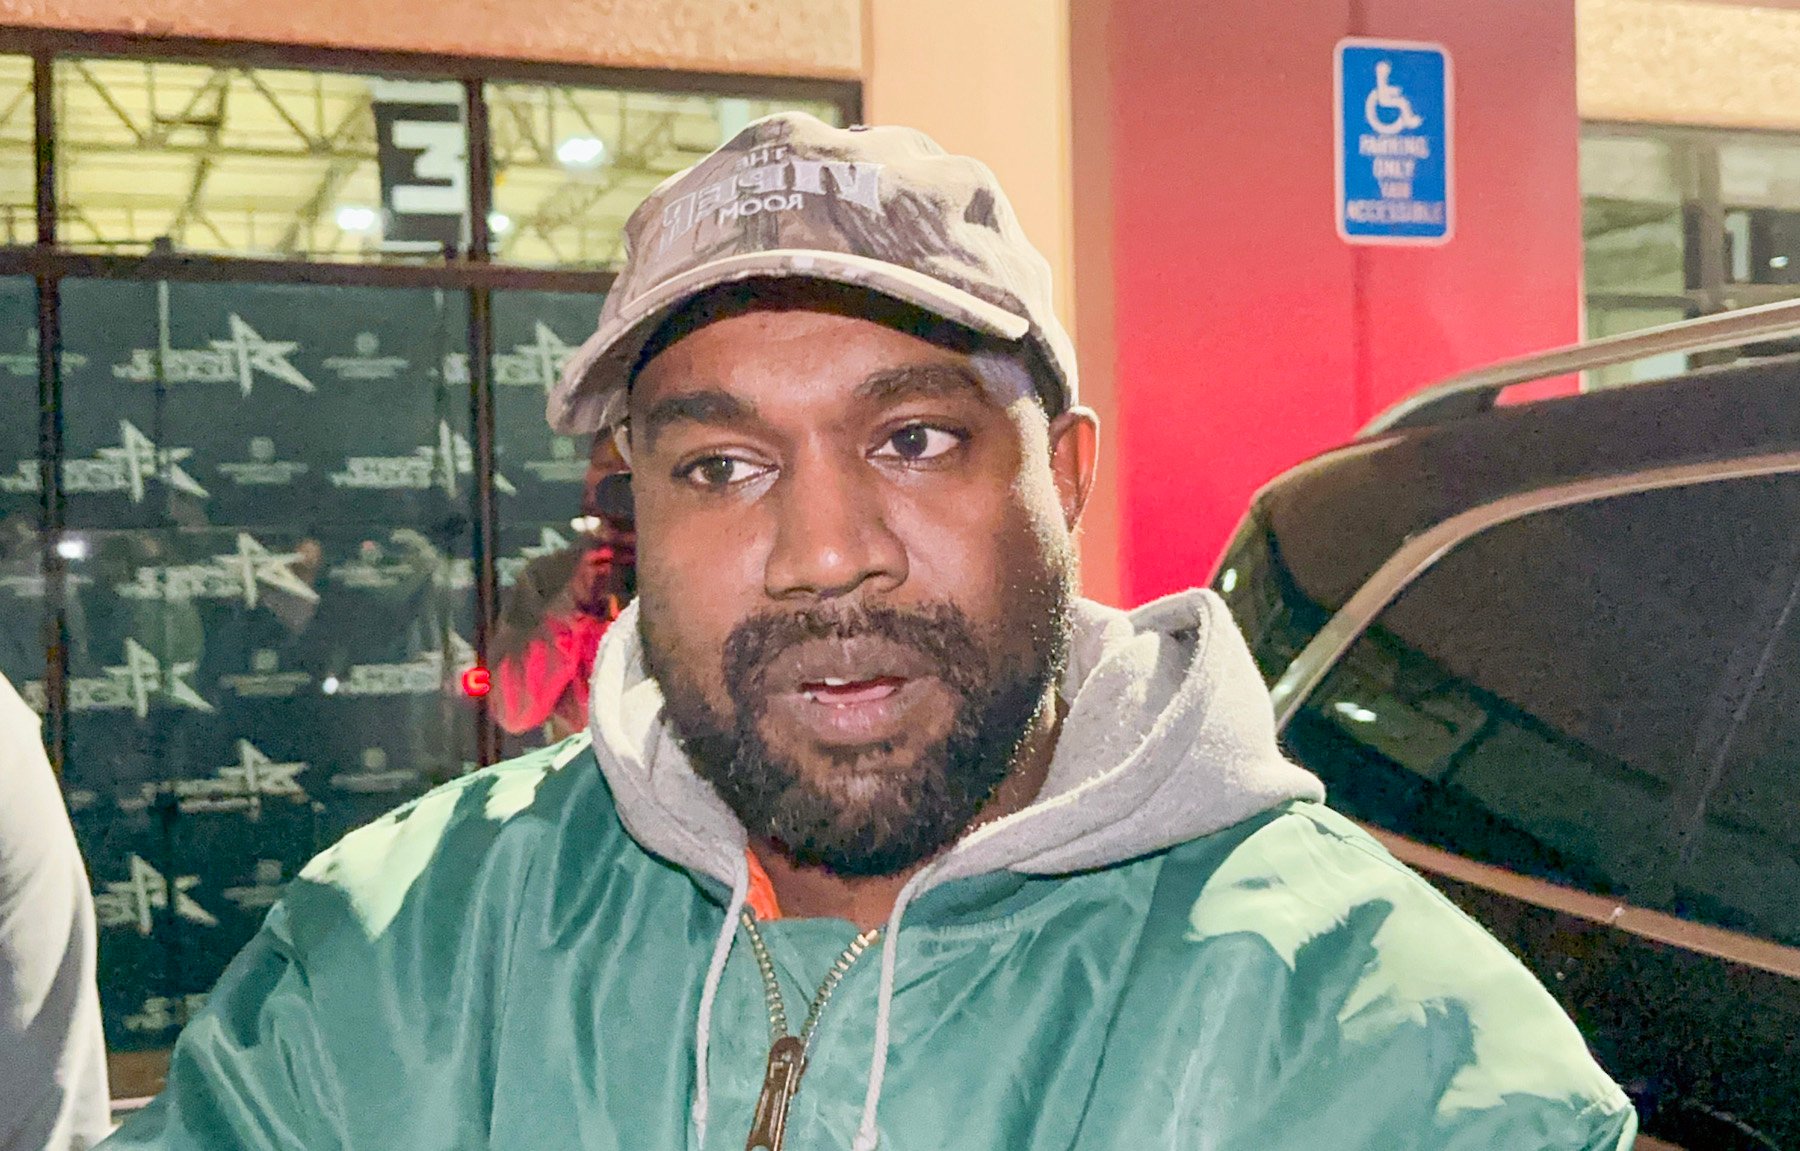 Kanye West, who was spotted leaving church in early 2023, wearing a green sweater